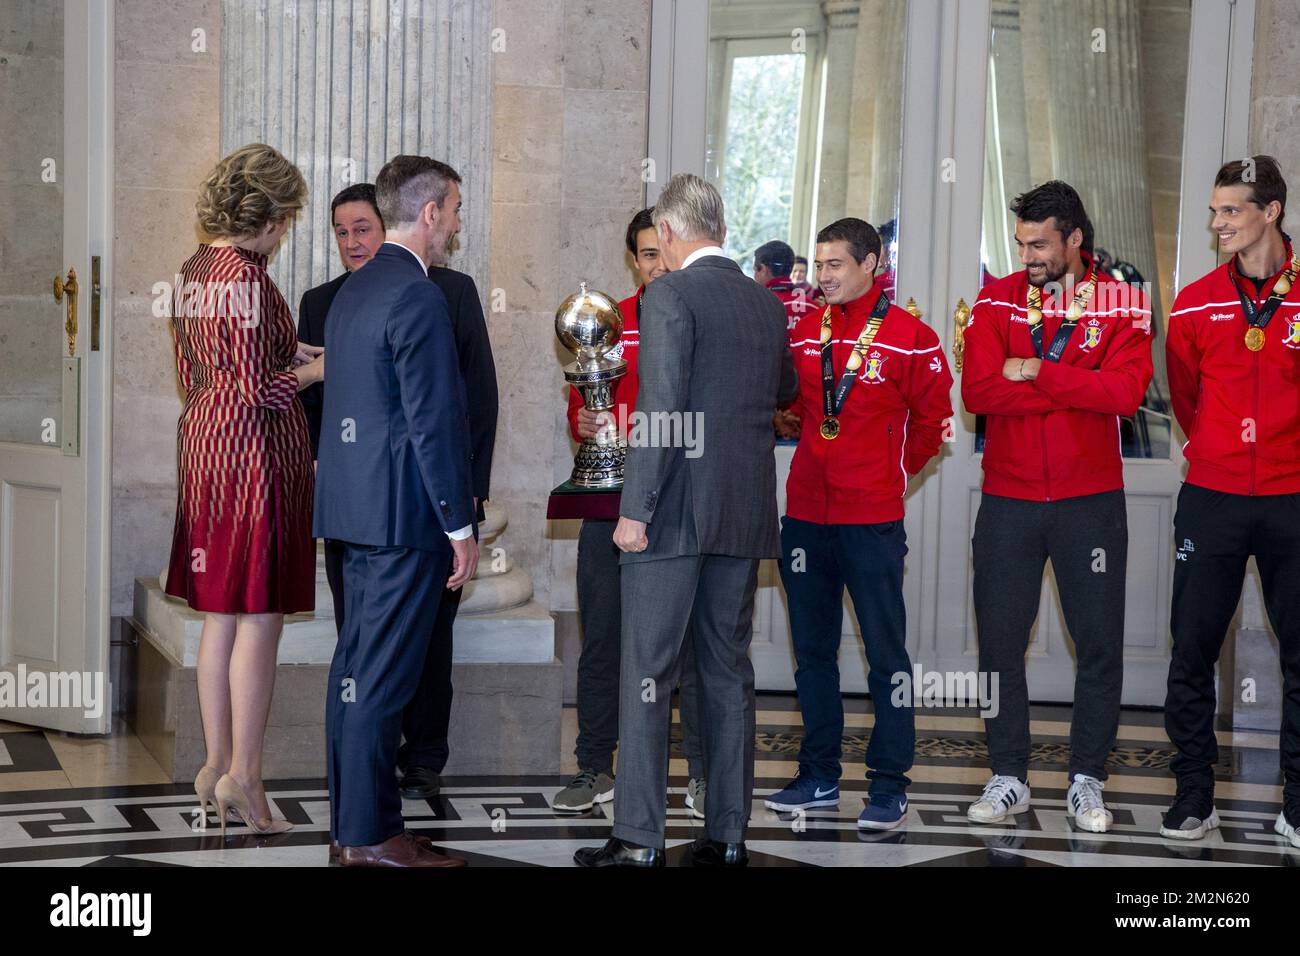 Queen Mathilde of Belgium, King Philippe - Filip of Belgium greet Belgian Hockey Federation chairman Marc Coudron, Belgian Hockey Federation Secretary-General Serge Pilet, Belgium's captain Thomas Briels, holding the World Cup trophy, Belgium's John-John Dohmen, Belgium's Simon Gougnard and Belgium's Felix Denayer pictured during a reception to honour the new hockey world champions, the Belgian Red Lions team, in the Royal castle in Laken - Laeken, Tuesday 18 December 2018. Red Lions won 3-2 the final against The Netherlands in India last last Sunday. BELGA PHOTO HATIM KAGHAT Stock Photo